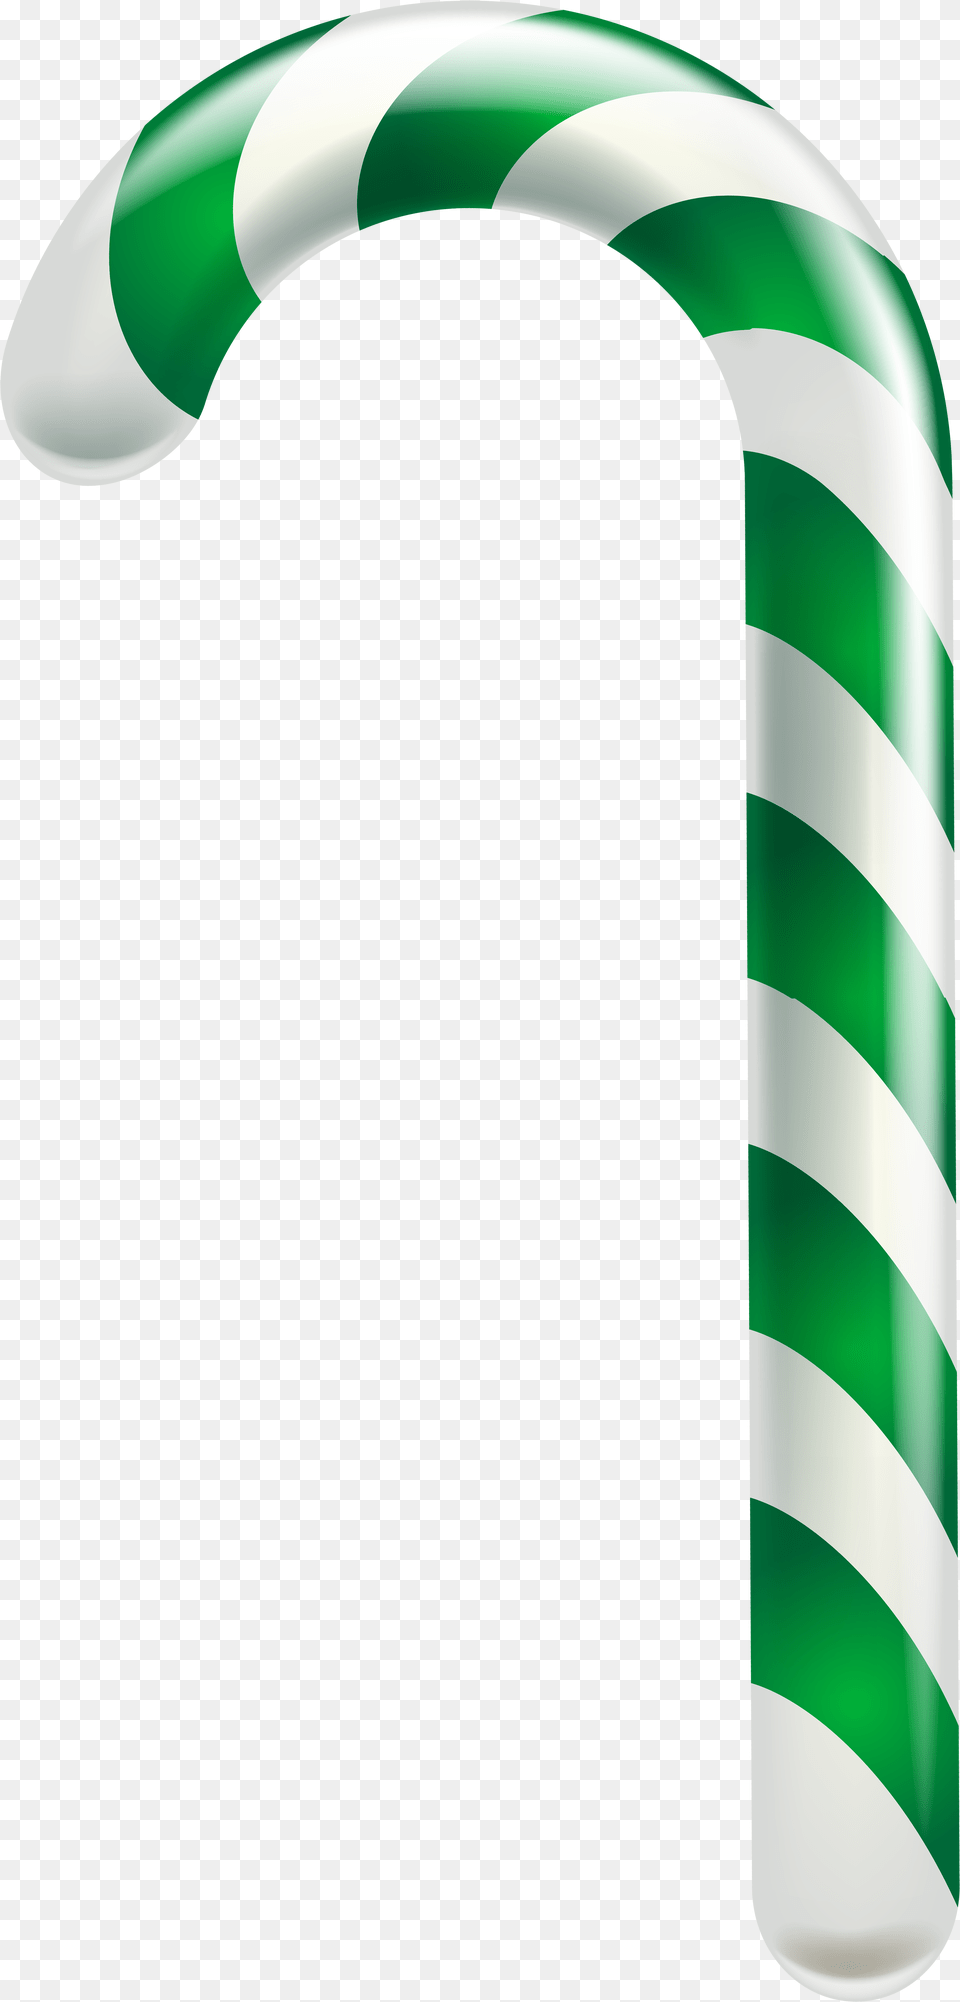 Transparent Candies Clipart Green Candy Cane, Stick, Food, Sweets, Can Png Image